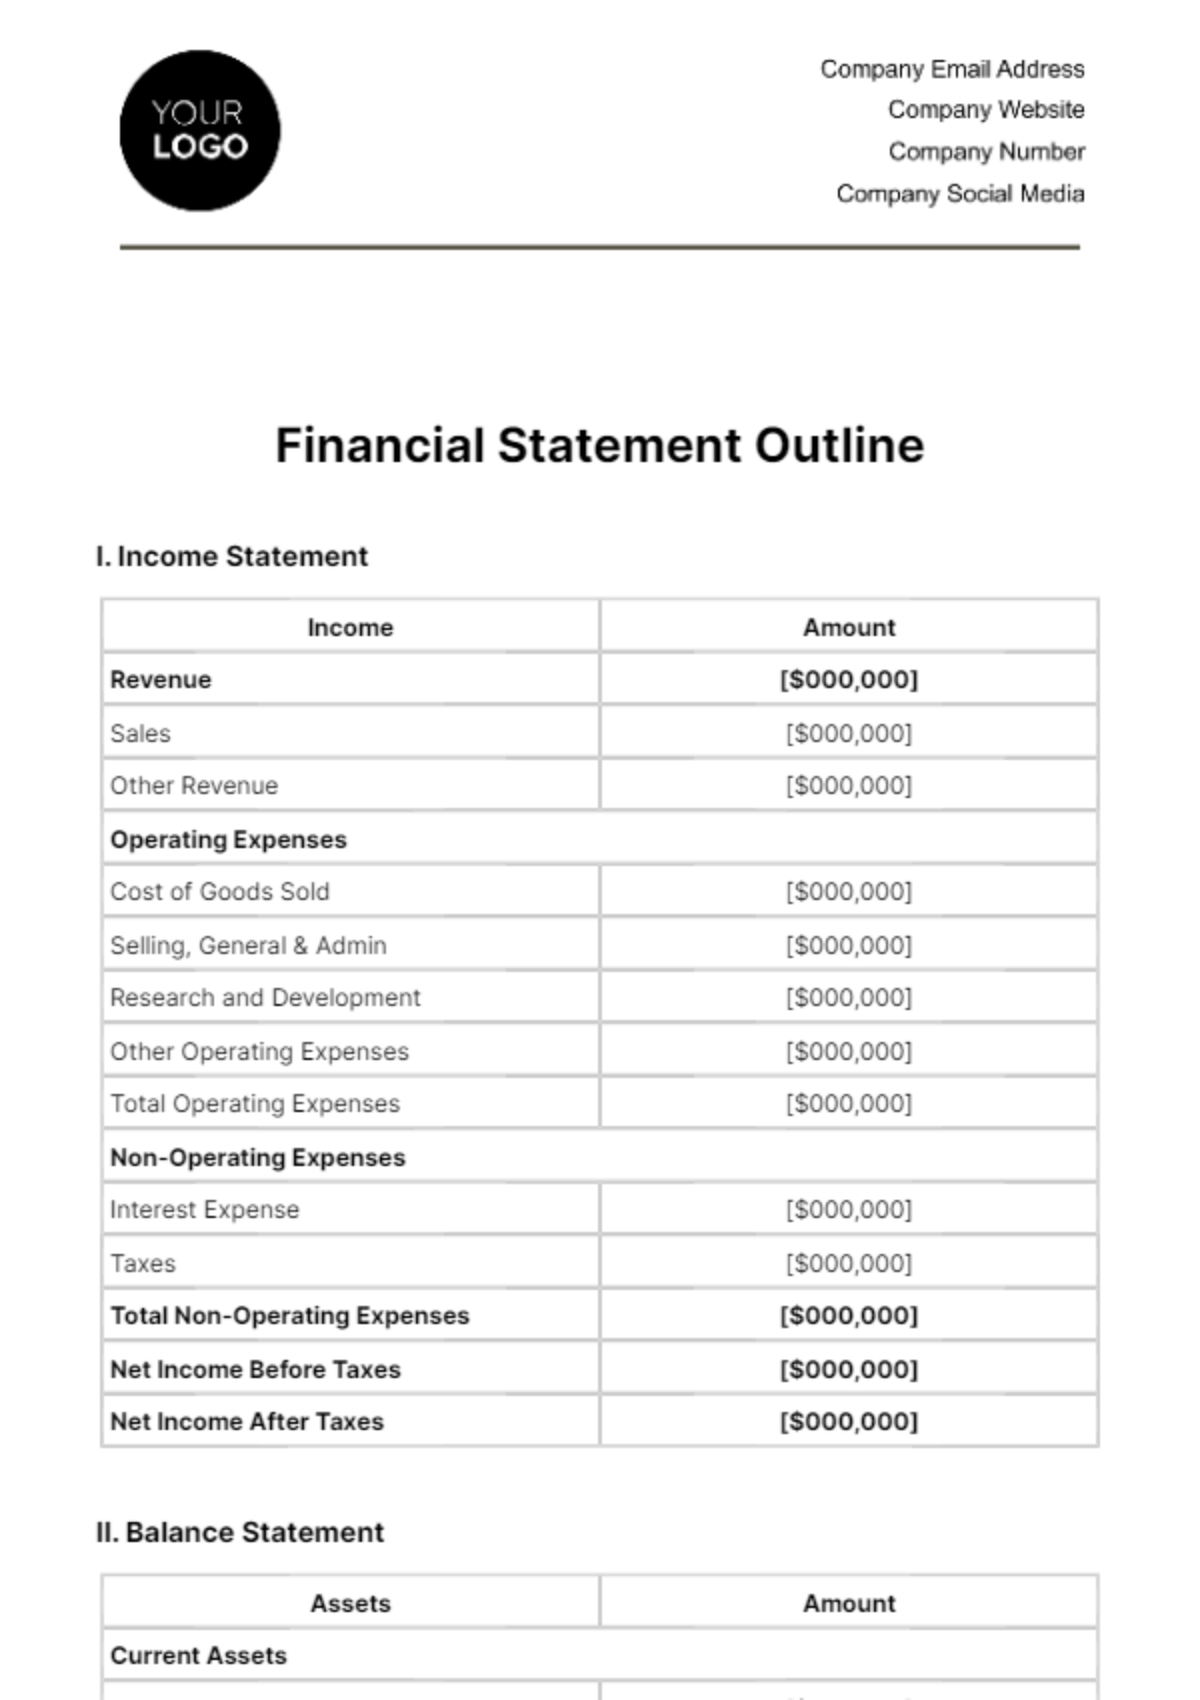 Financial Statement Outline Template